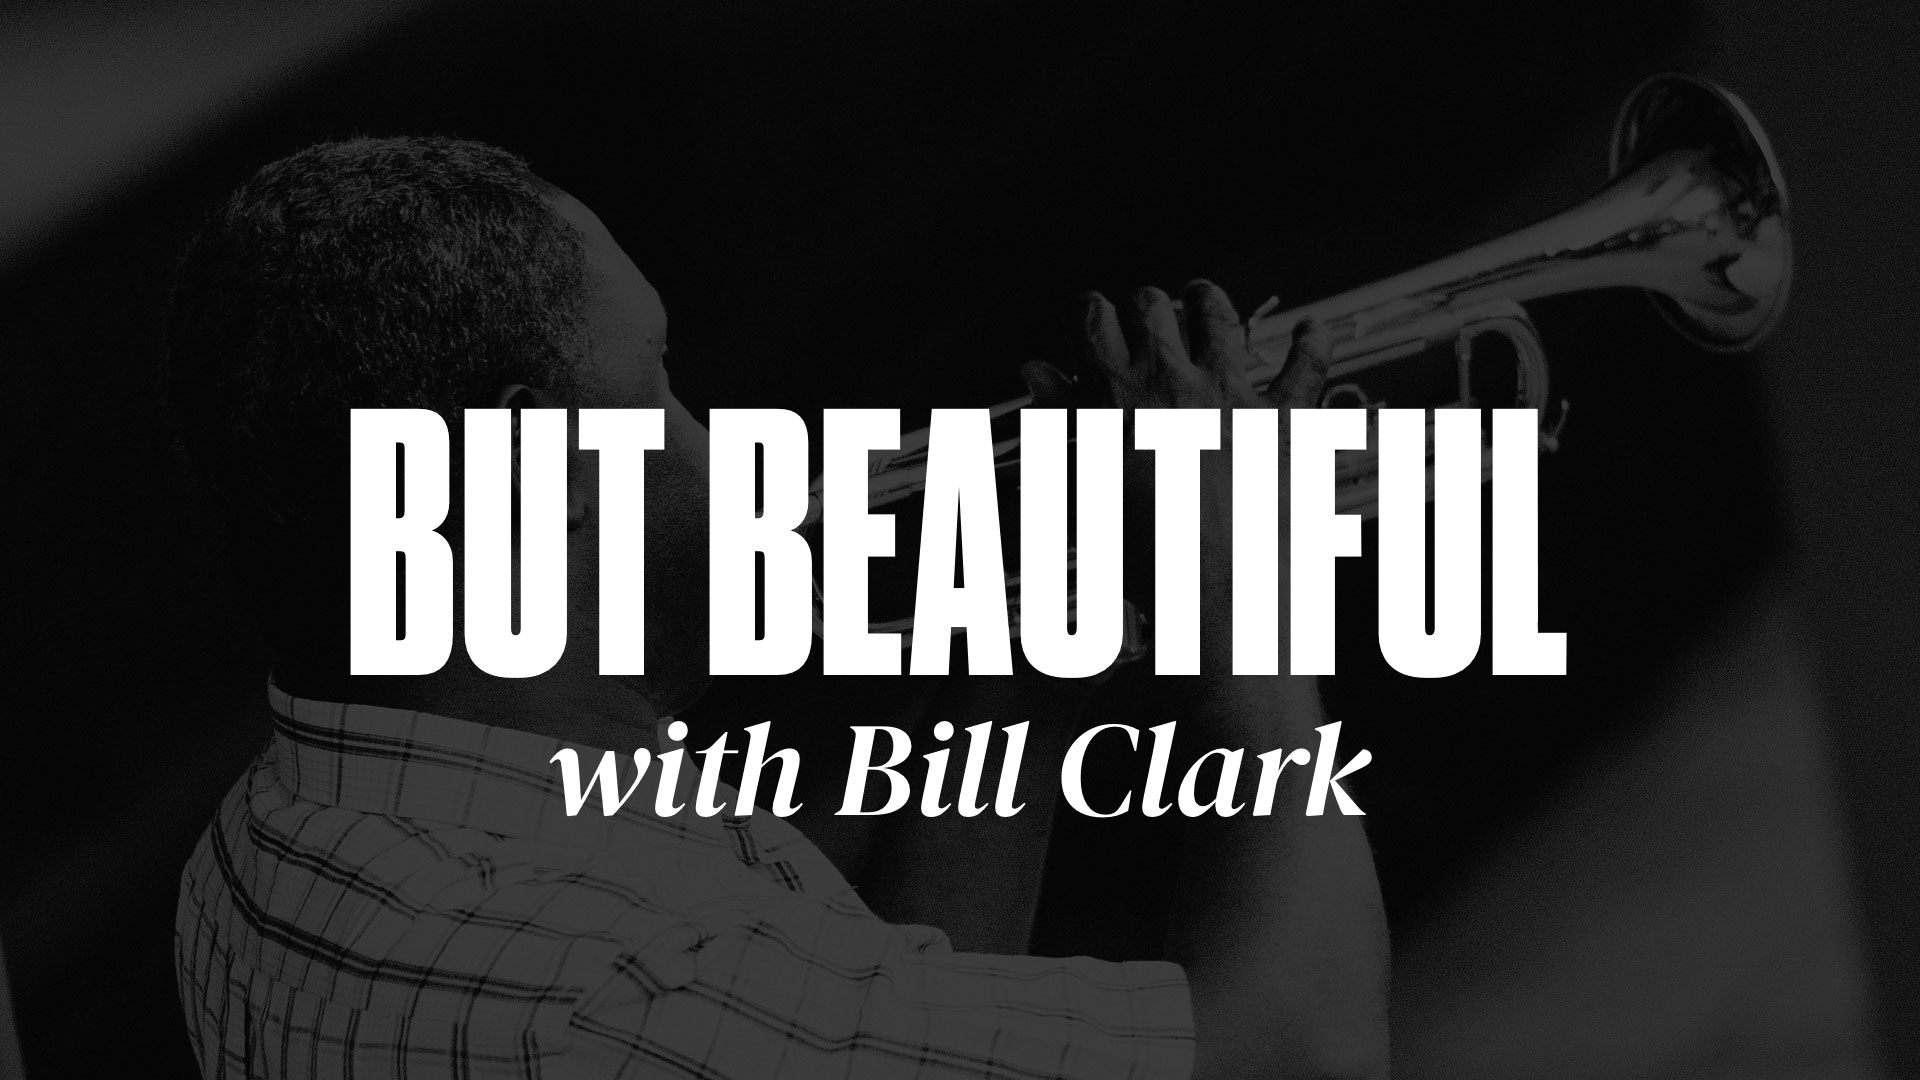 But Beautiful with Bill Clark